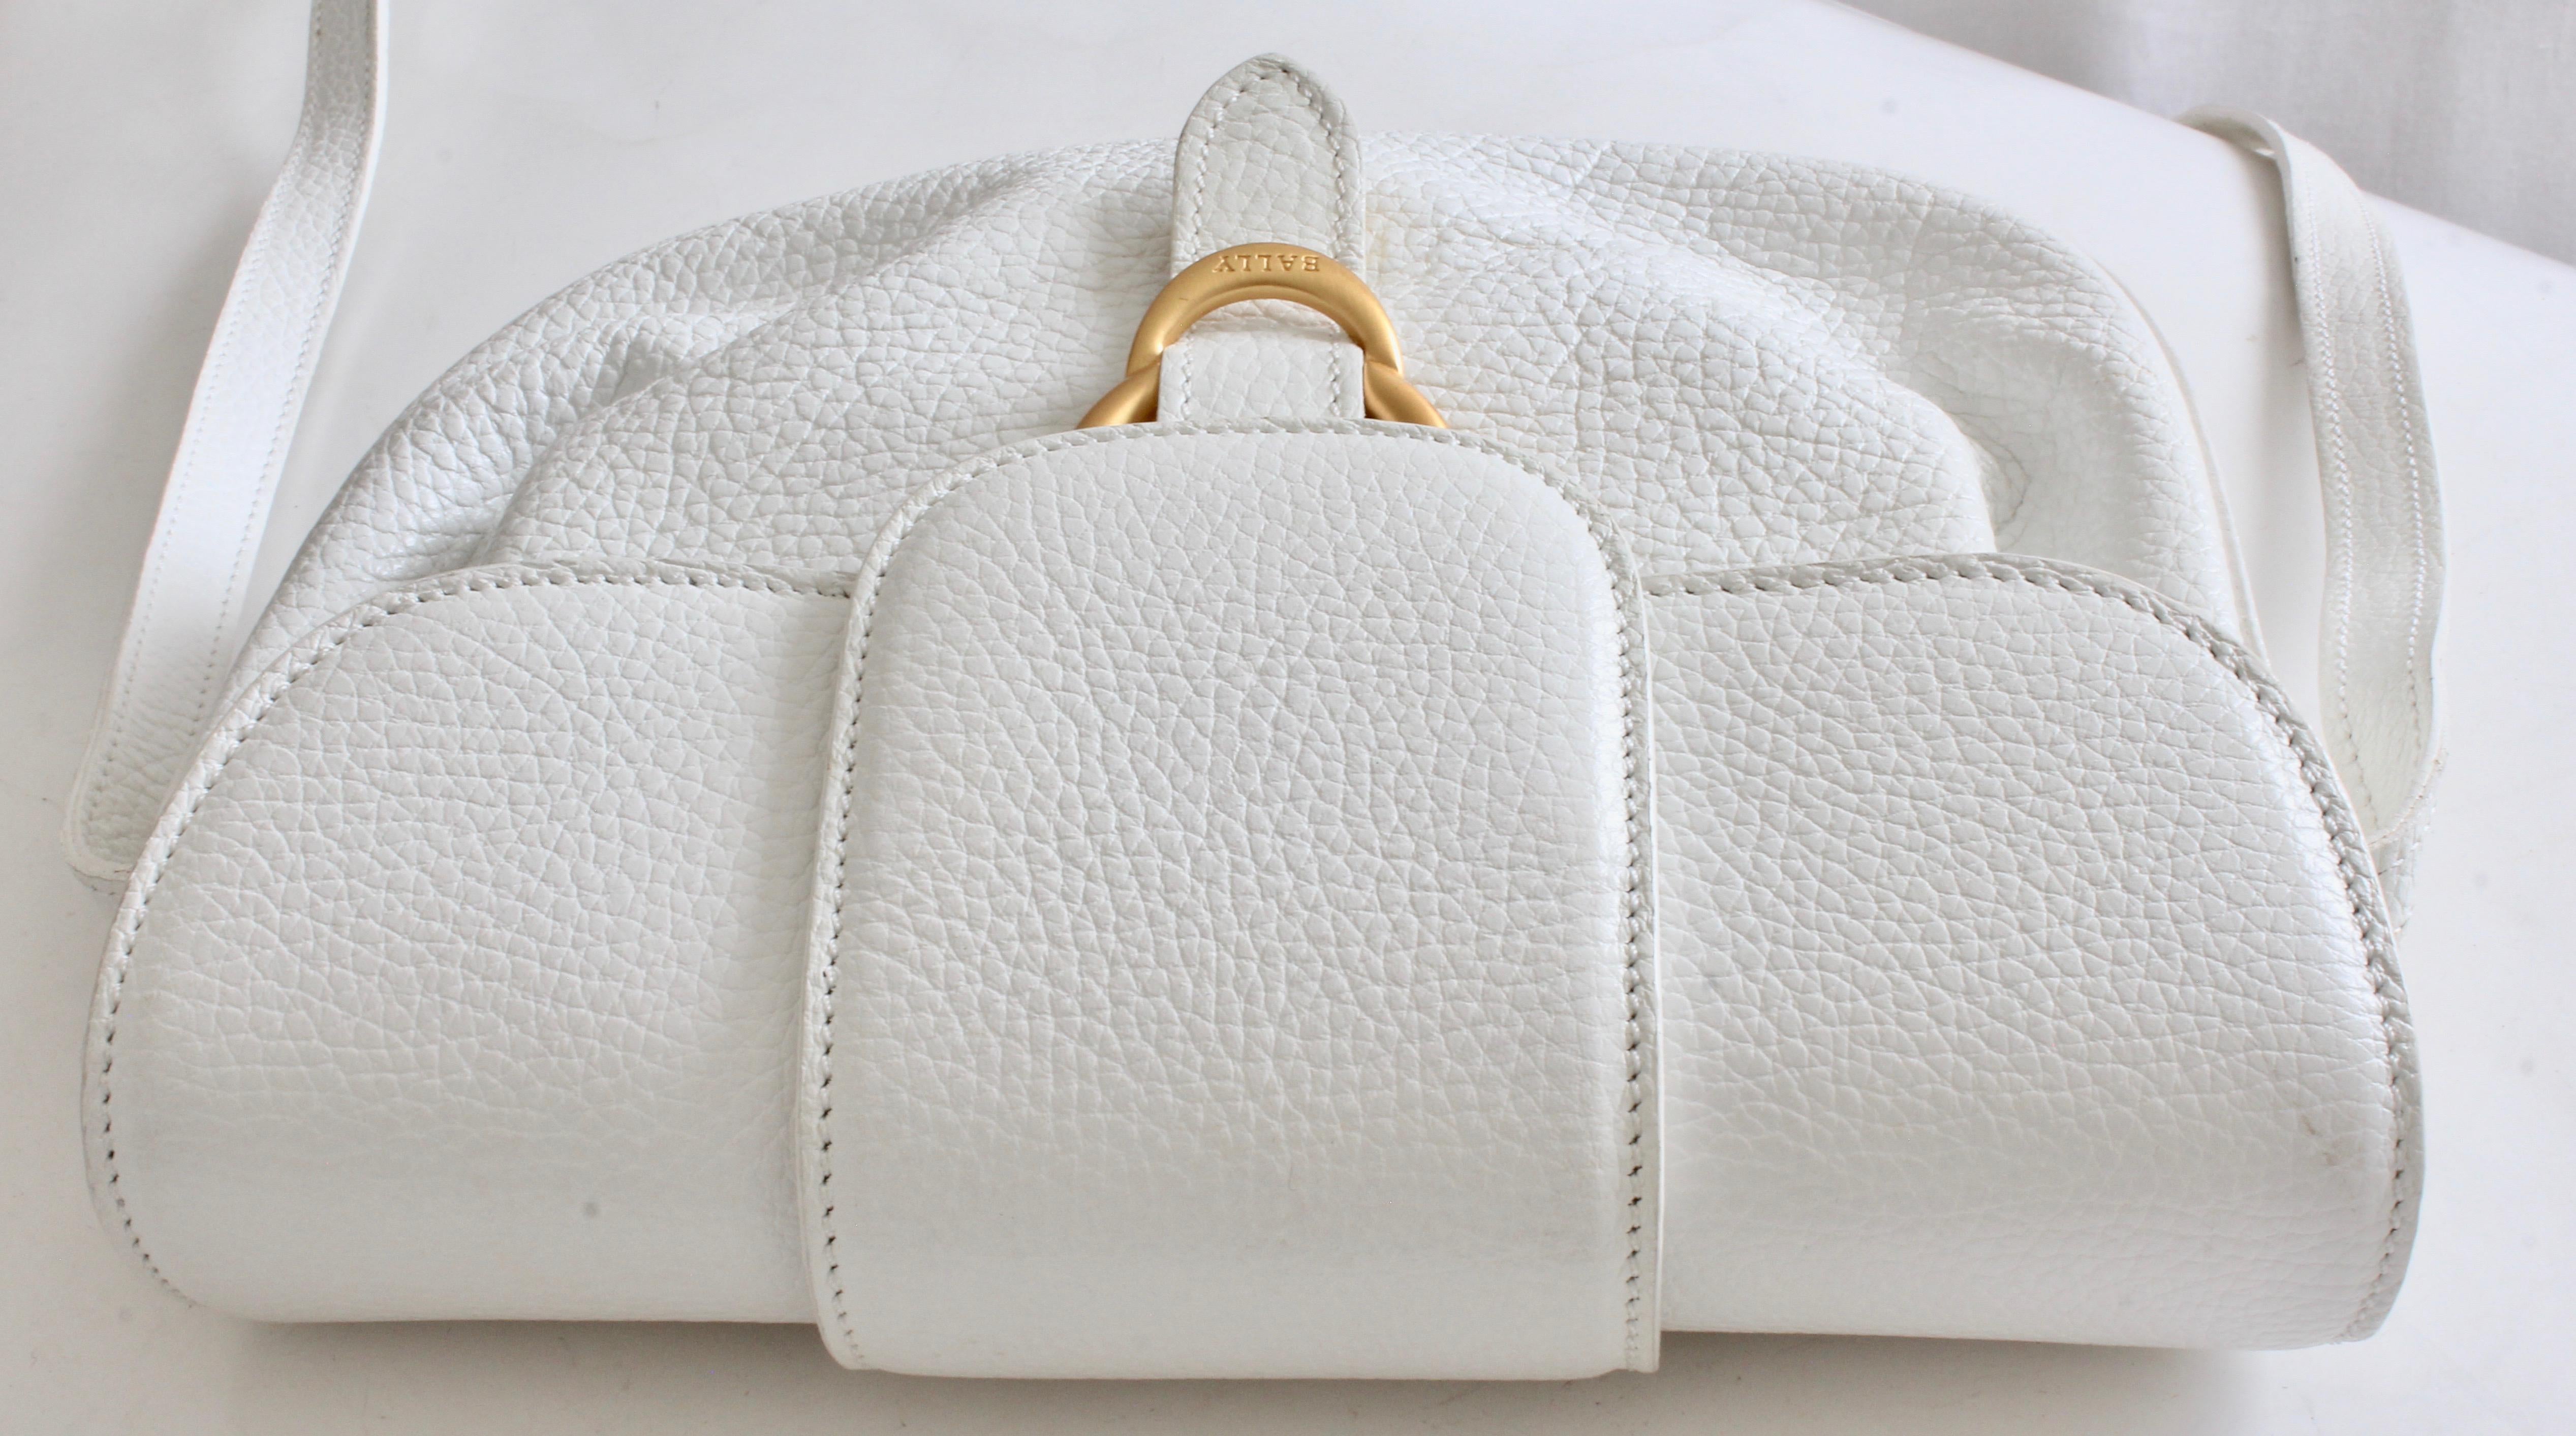 Bally Crossbody Bag White Pebbled Leather Top Flap Shoulder Bag Italy Vintage For Sale 2